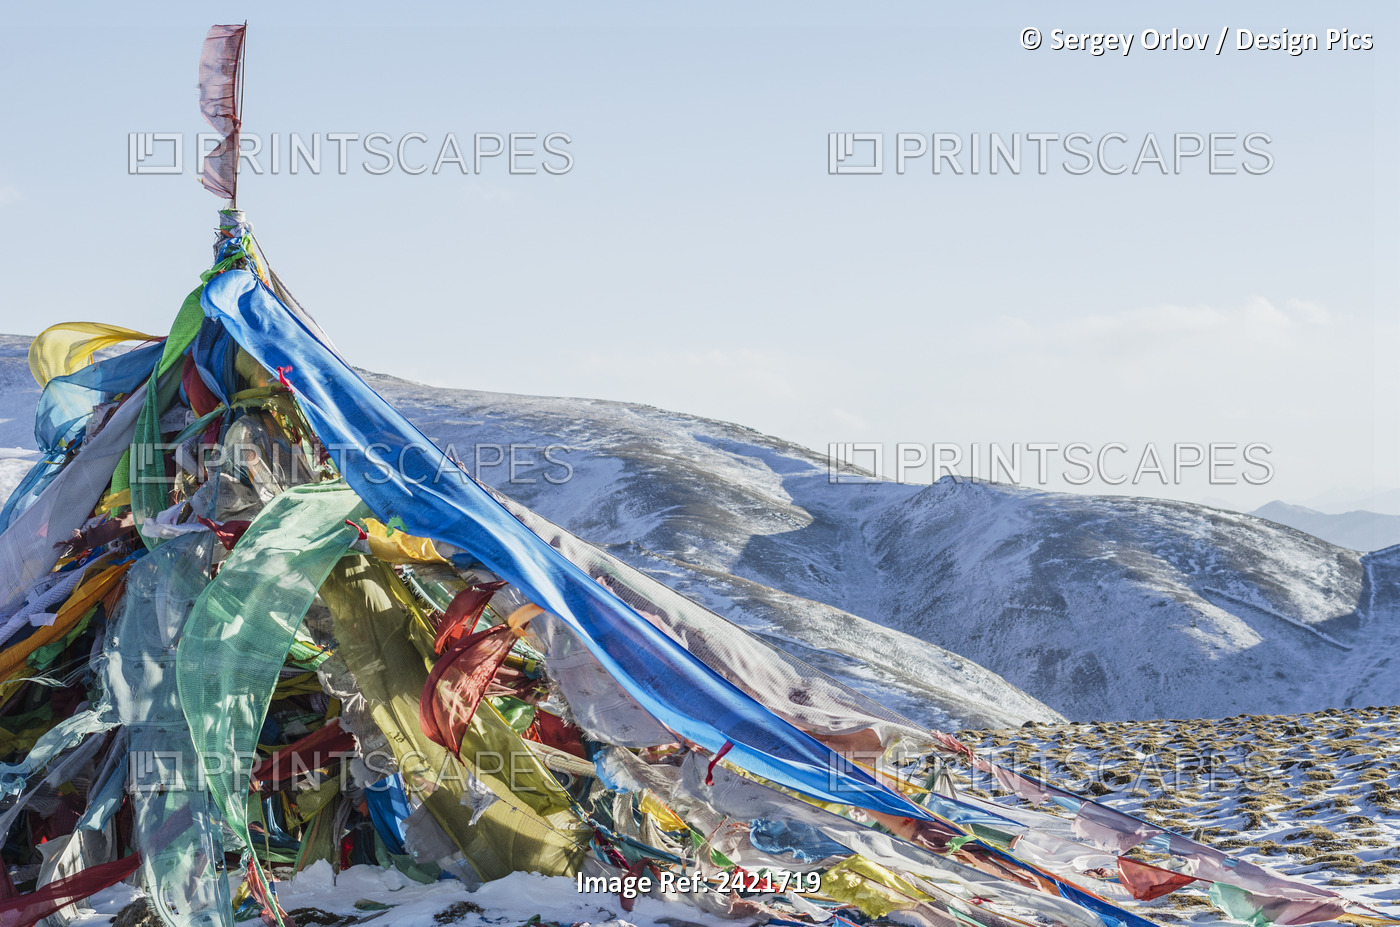 Snowy Landscape With Prayer Flags On A High Altitude Mountain Pass; Tibet